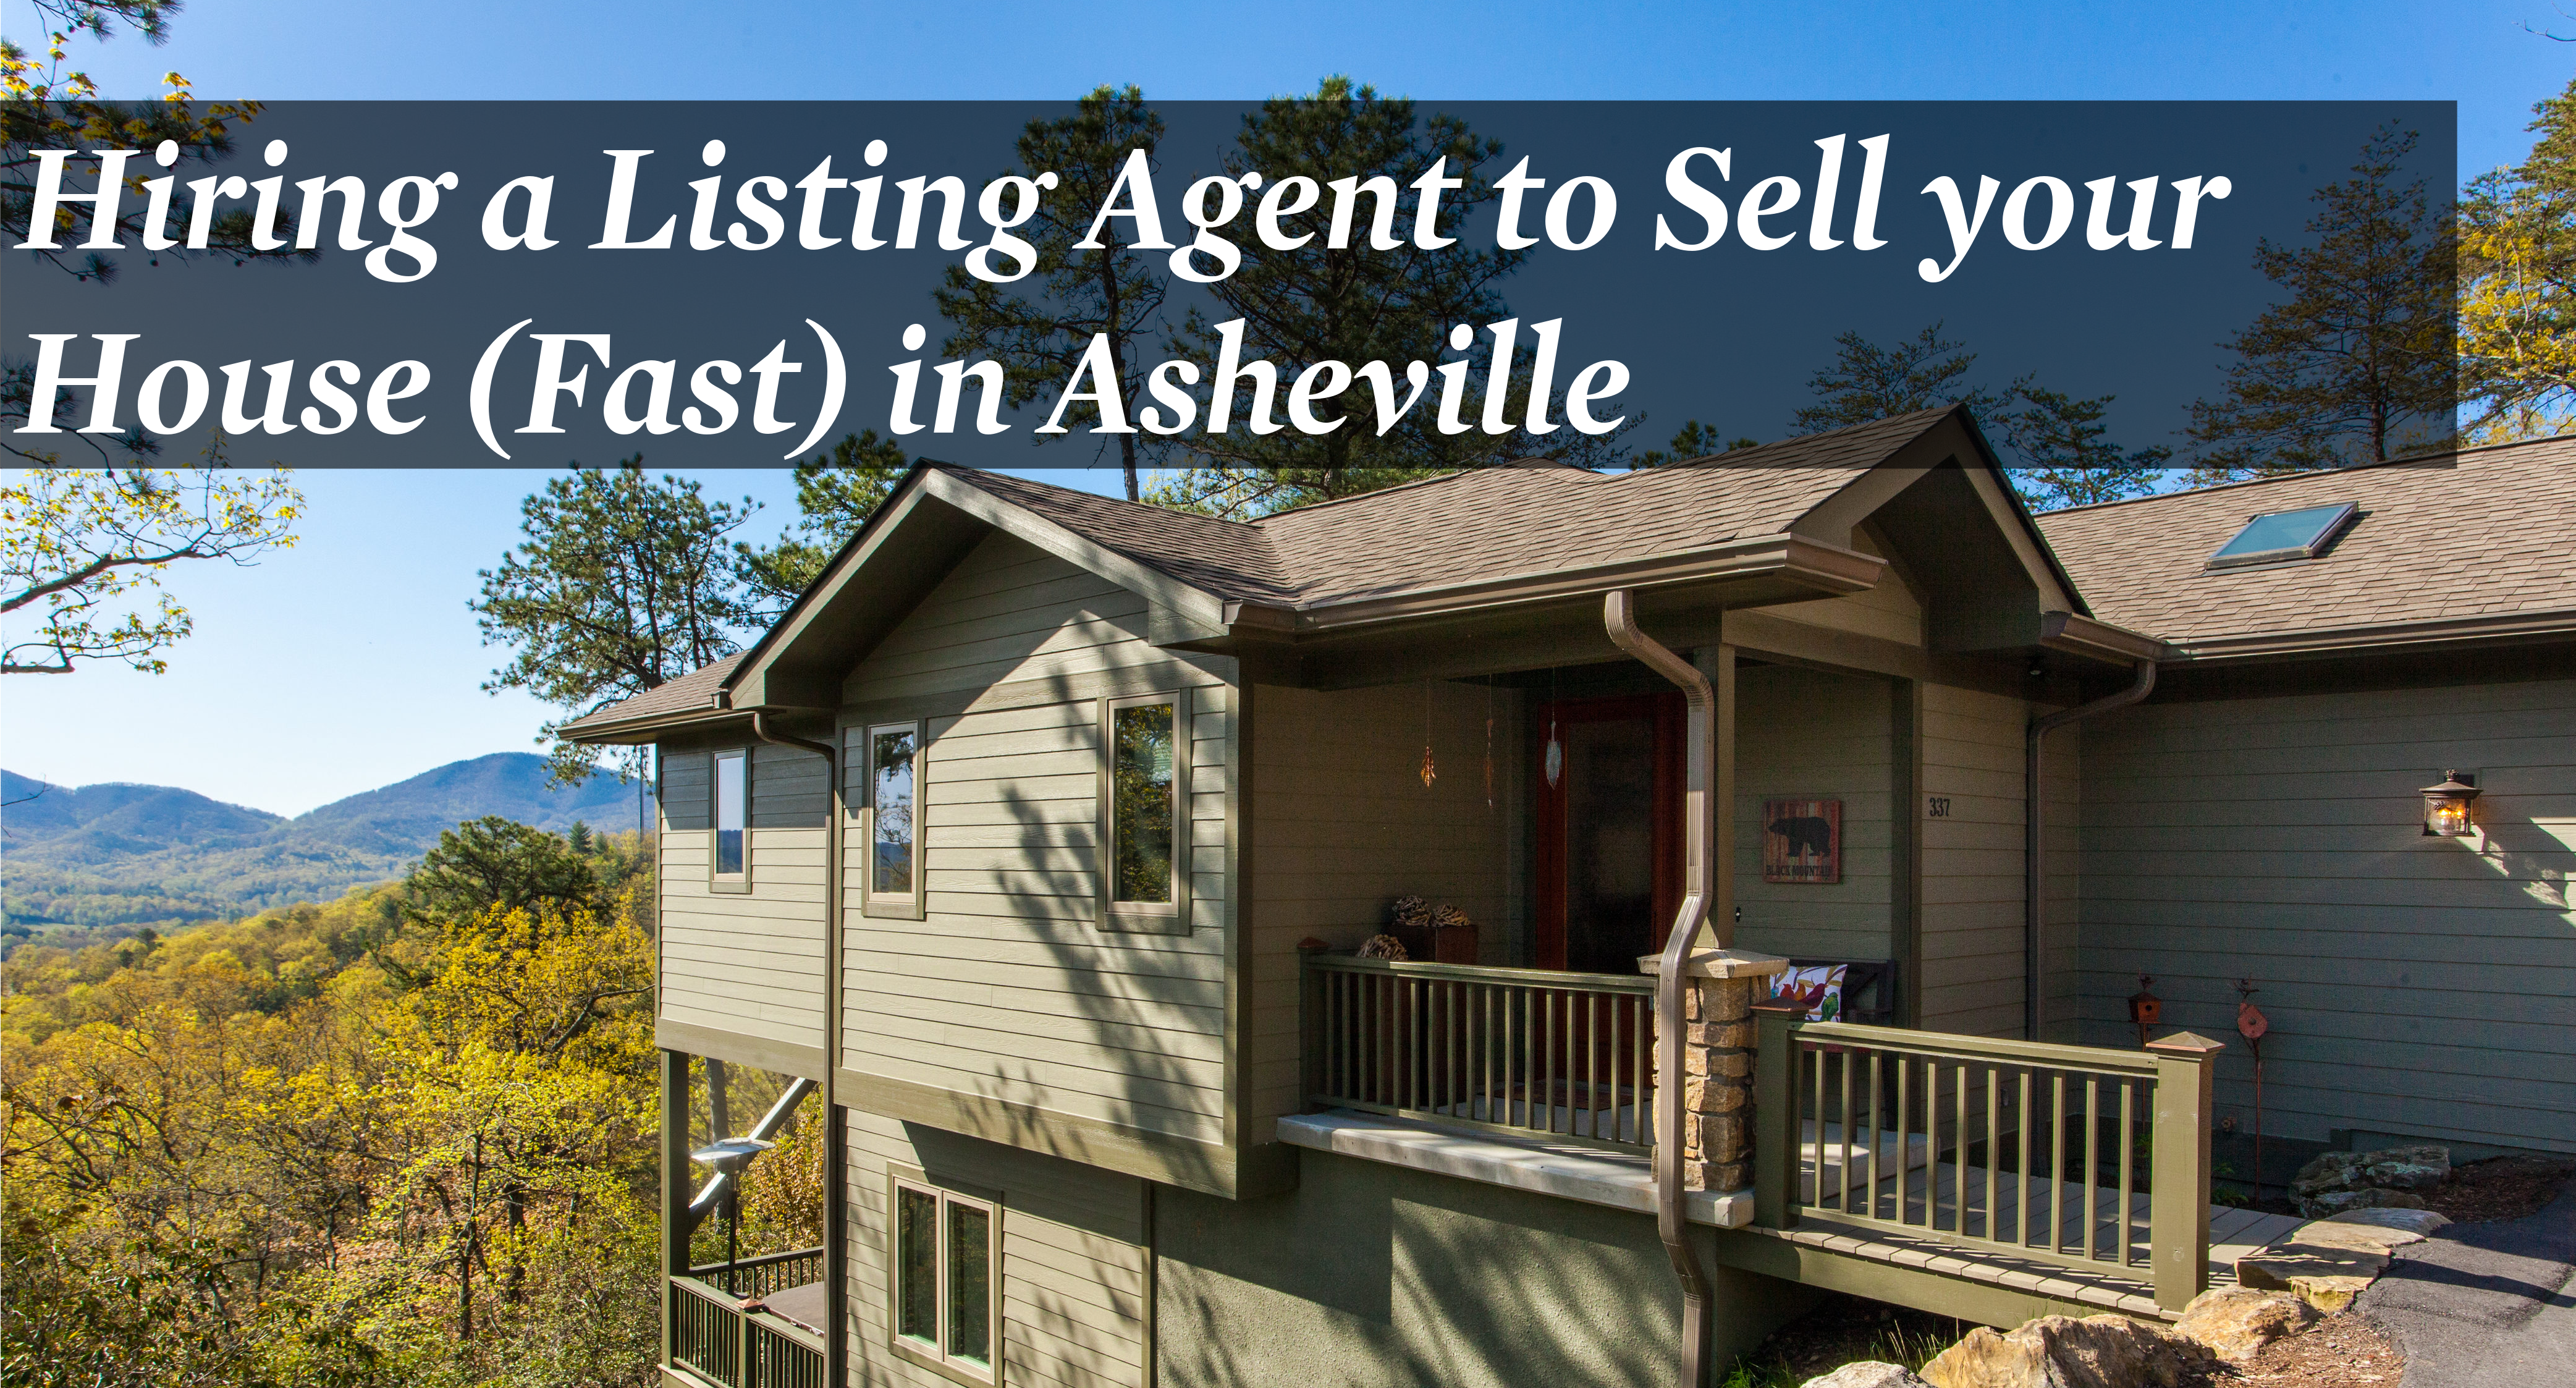 Need To Sell Your House Fast? - Home - Facebook